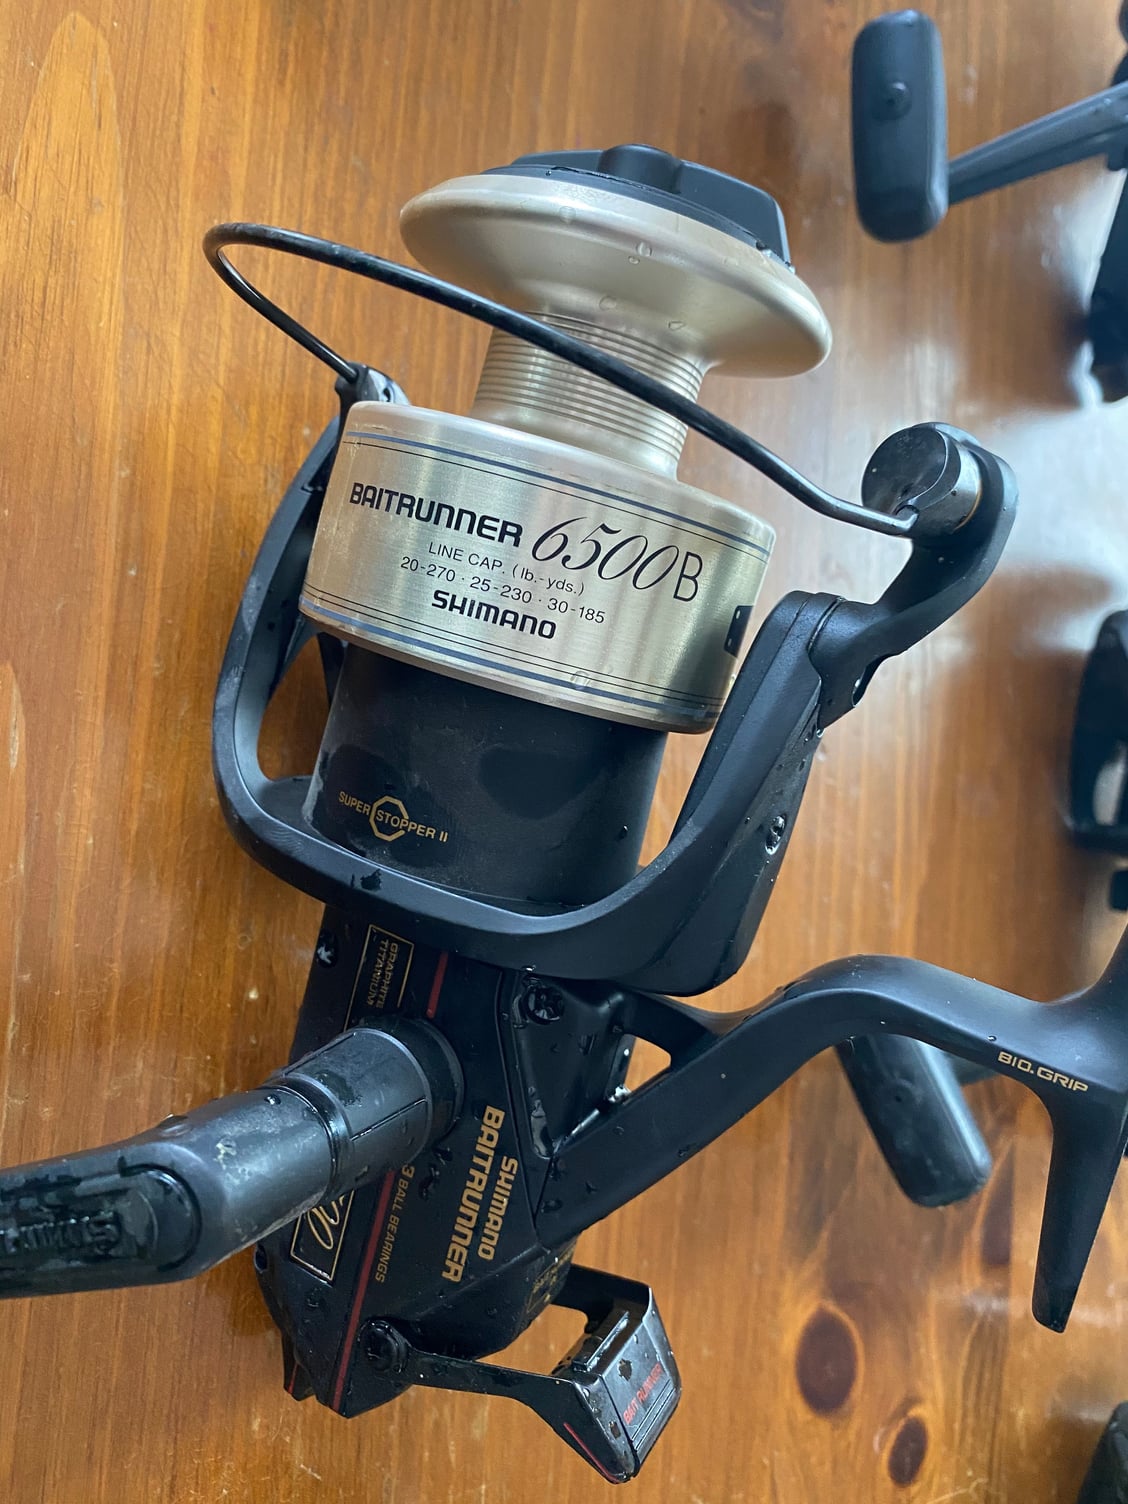 Old but new (7)shimano baitrunner 6500b for sale - The Hull Truth